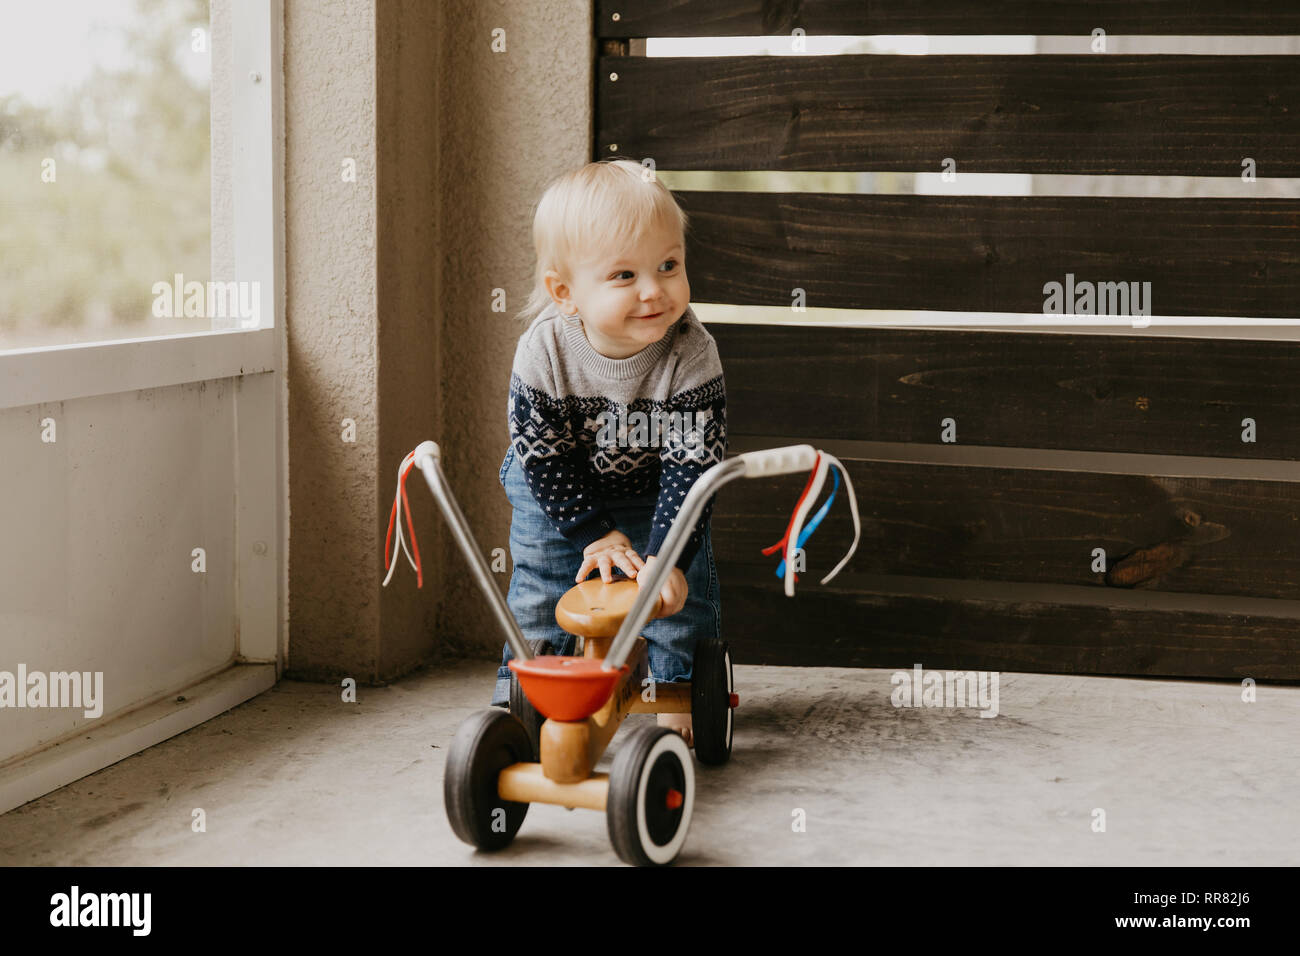 Precious Adorable Cute Little Blonde Baby Toddler Boy Kid Playing Outside on Wooden Toy Bicycle Scooter Mobile Smiling at the Camera and Having Fun Stock Photo